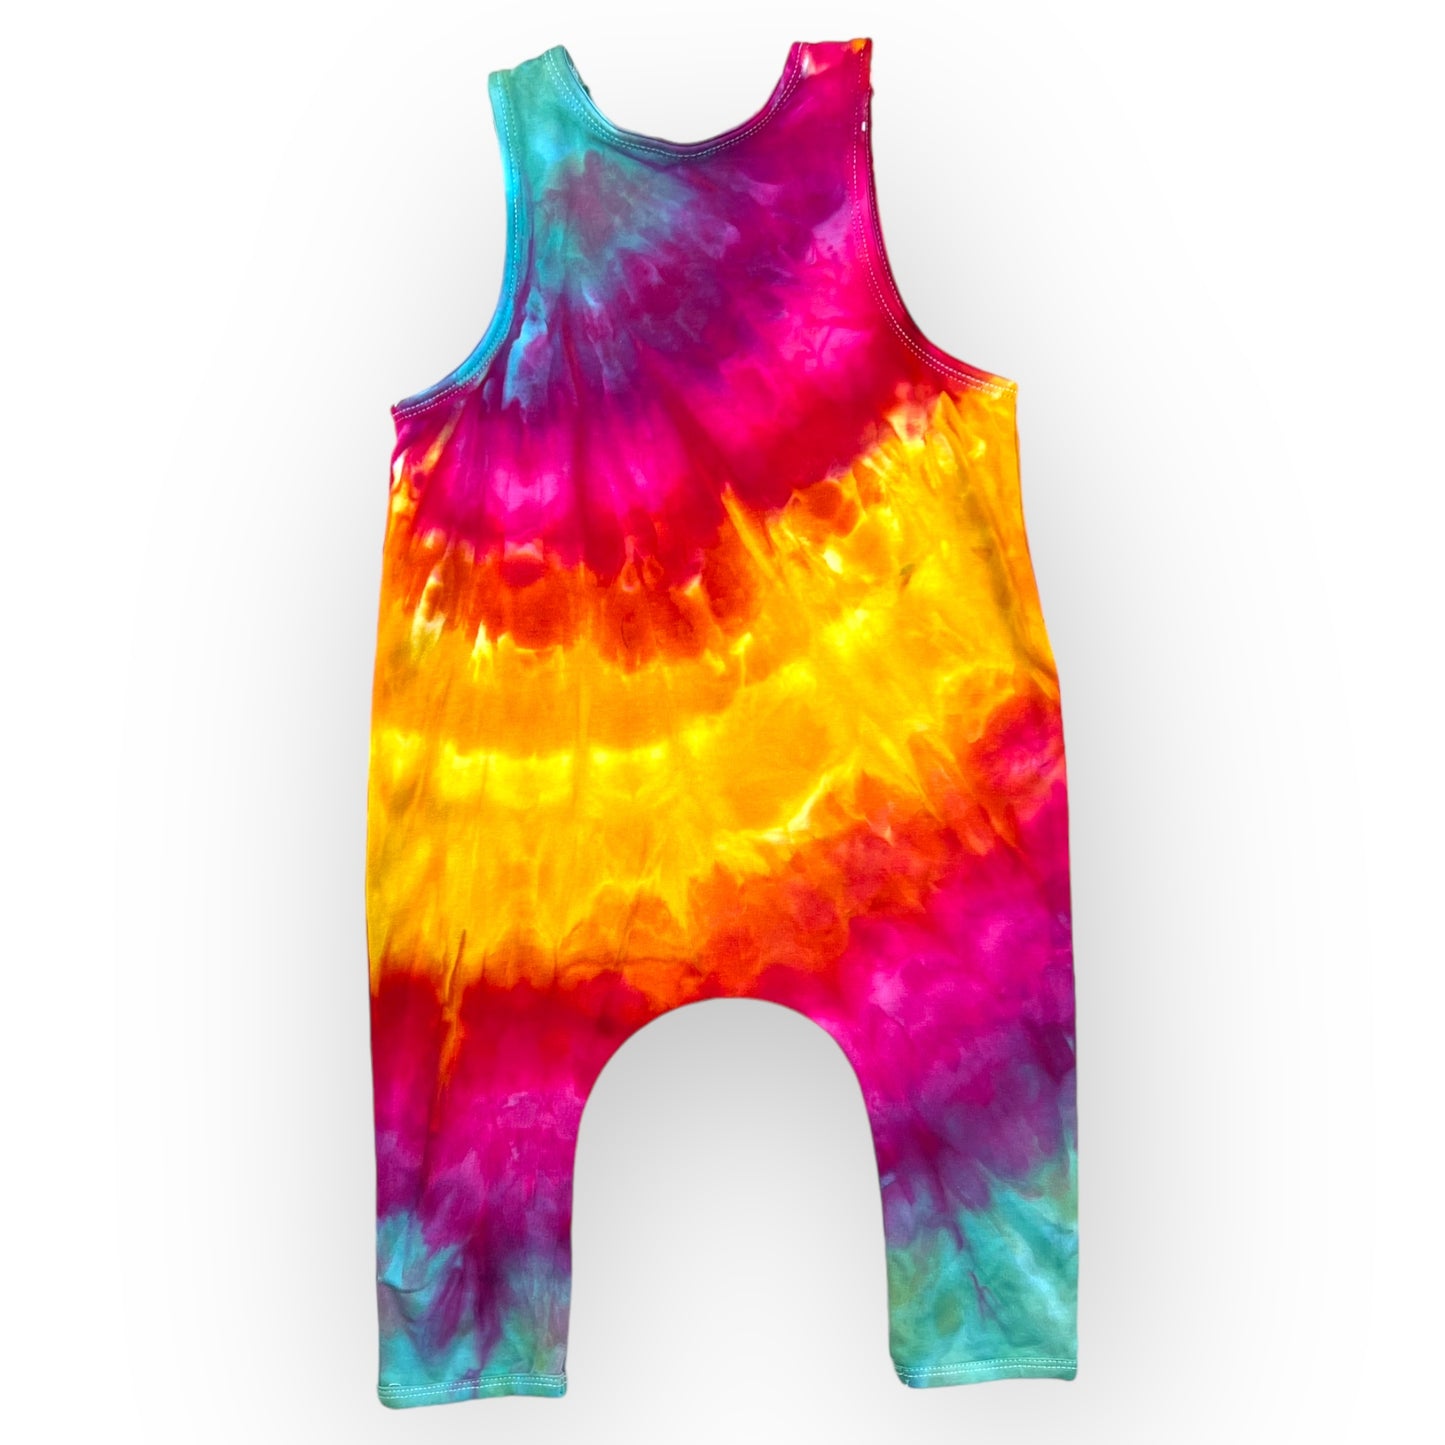 Aqua, Pink & Yellow Tie Dye Slouch Romper Age 6-12 Months